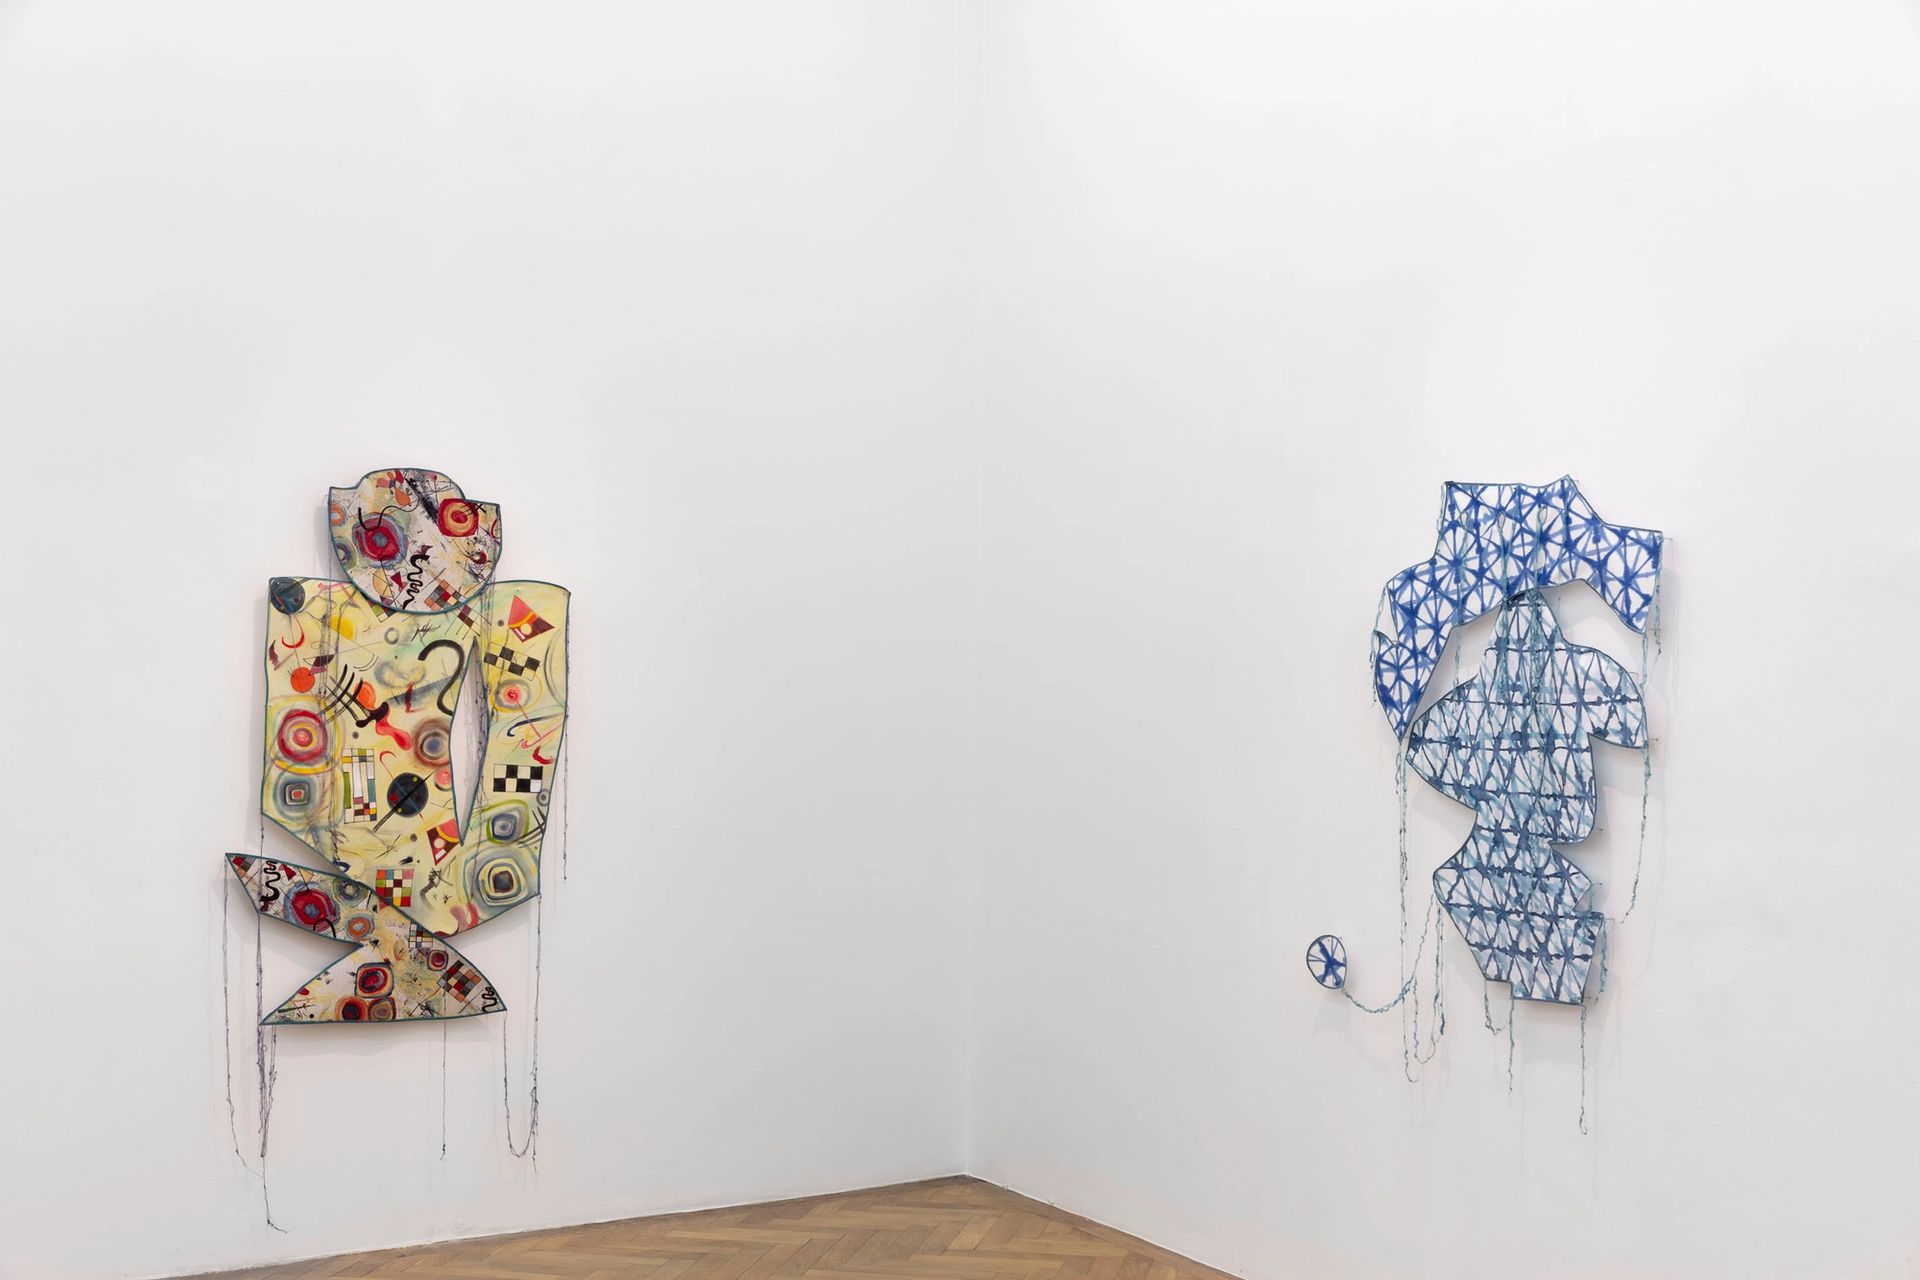 From left: Mozo con smoking, 2022, Industrial textiles and copies of the patterns painted by hand, 148 × 95 cm
/
Passant mit Zylinder, 2021, Industrial textiles and copies of the patterns painted by hand, silkscreen print, 116 × 116 cm